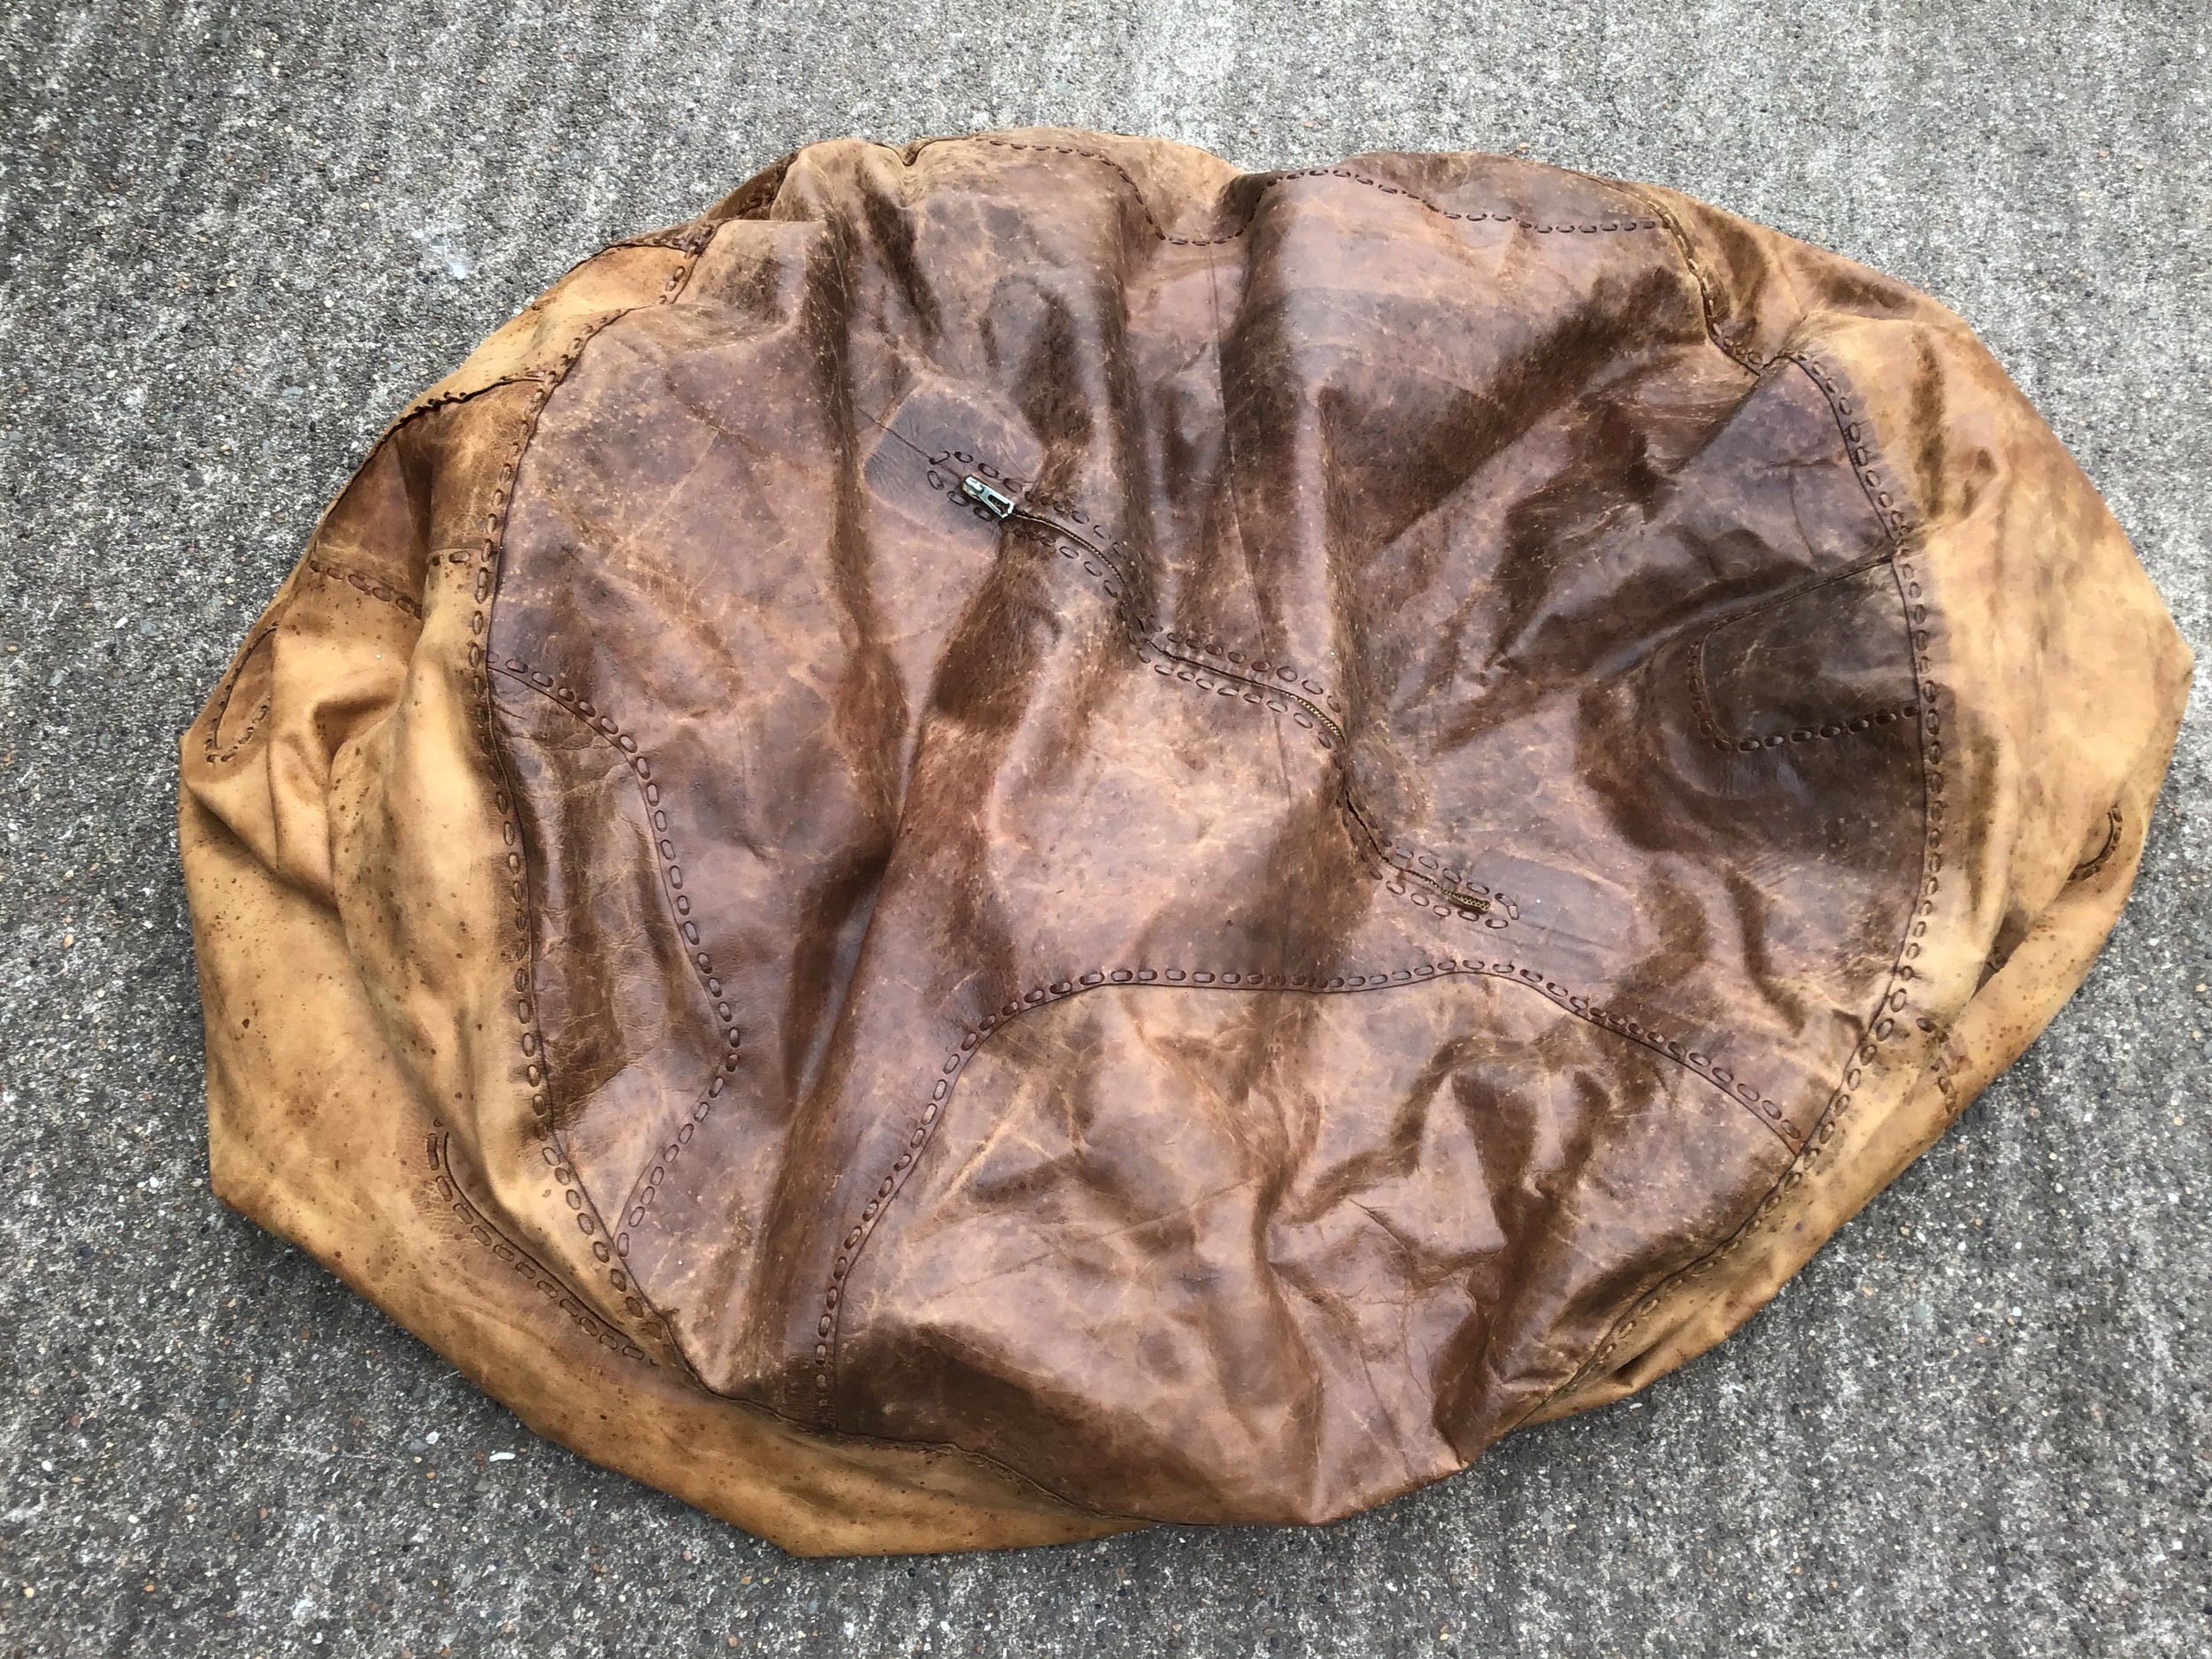 Large Leather Bean Bag - Image 2 of 2